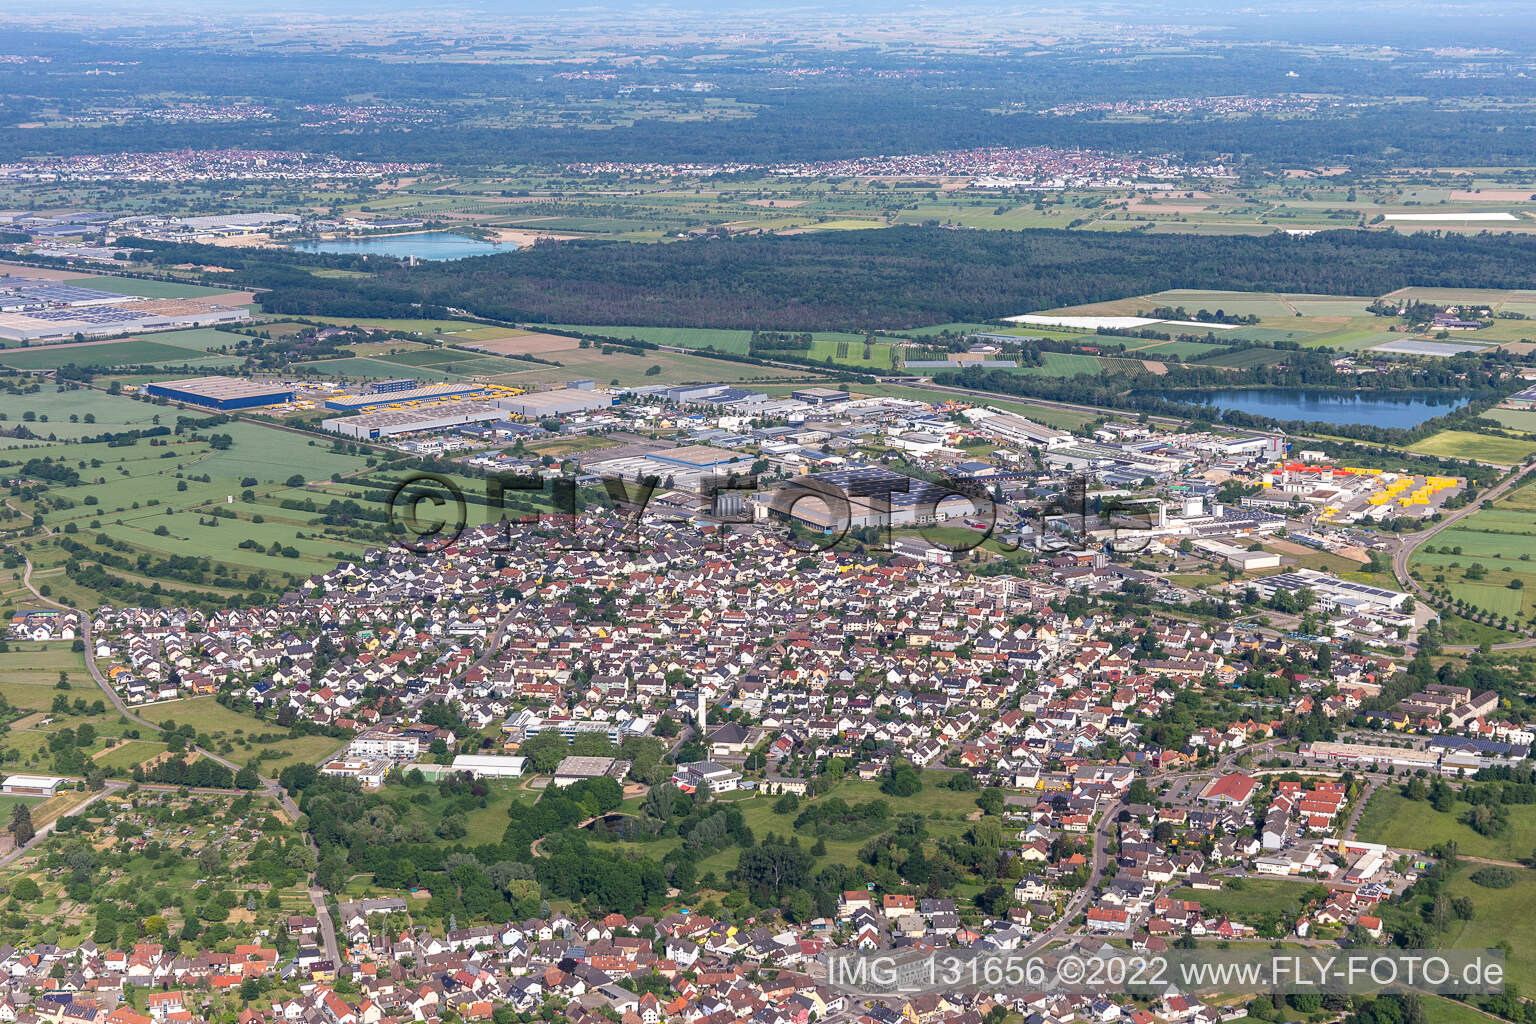 Malsch in the state Baden-Wuerttemberg, Germany viewn from the air